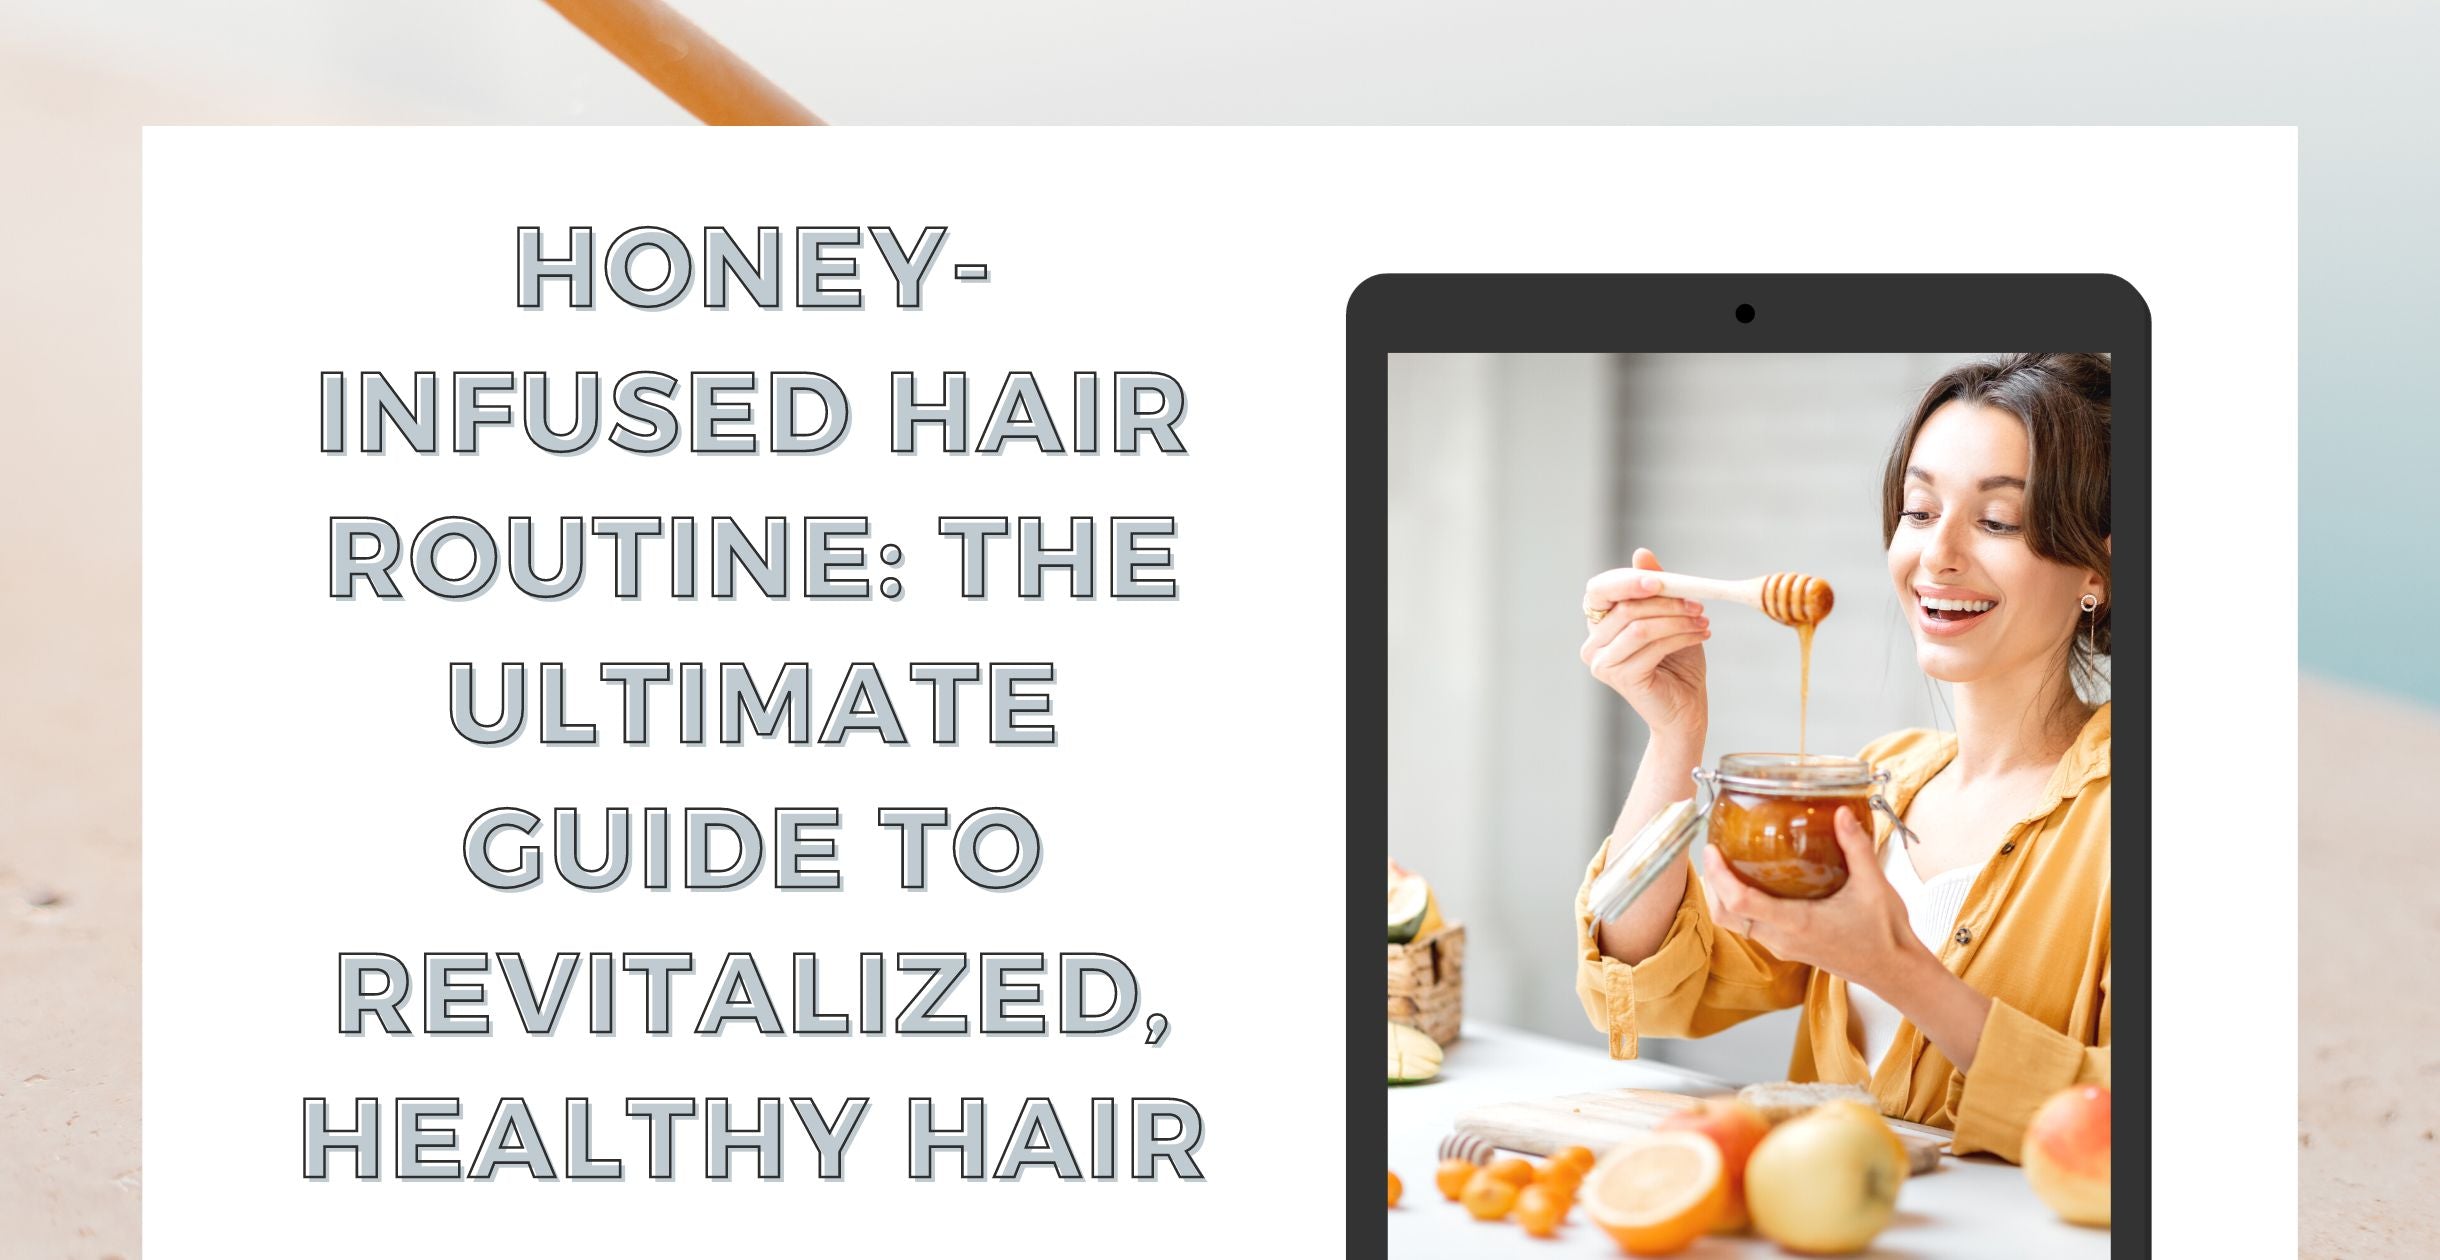 Honey-Infused Hair Routine: The Ultimate Guide to Revitalized, Healthy Hair